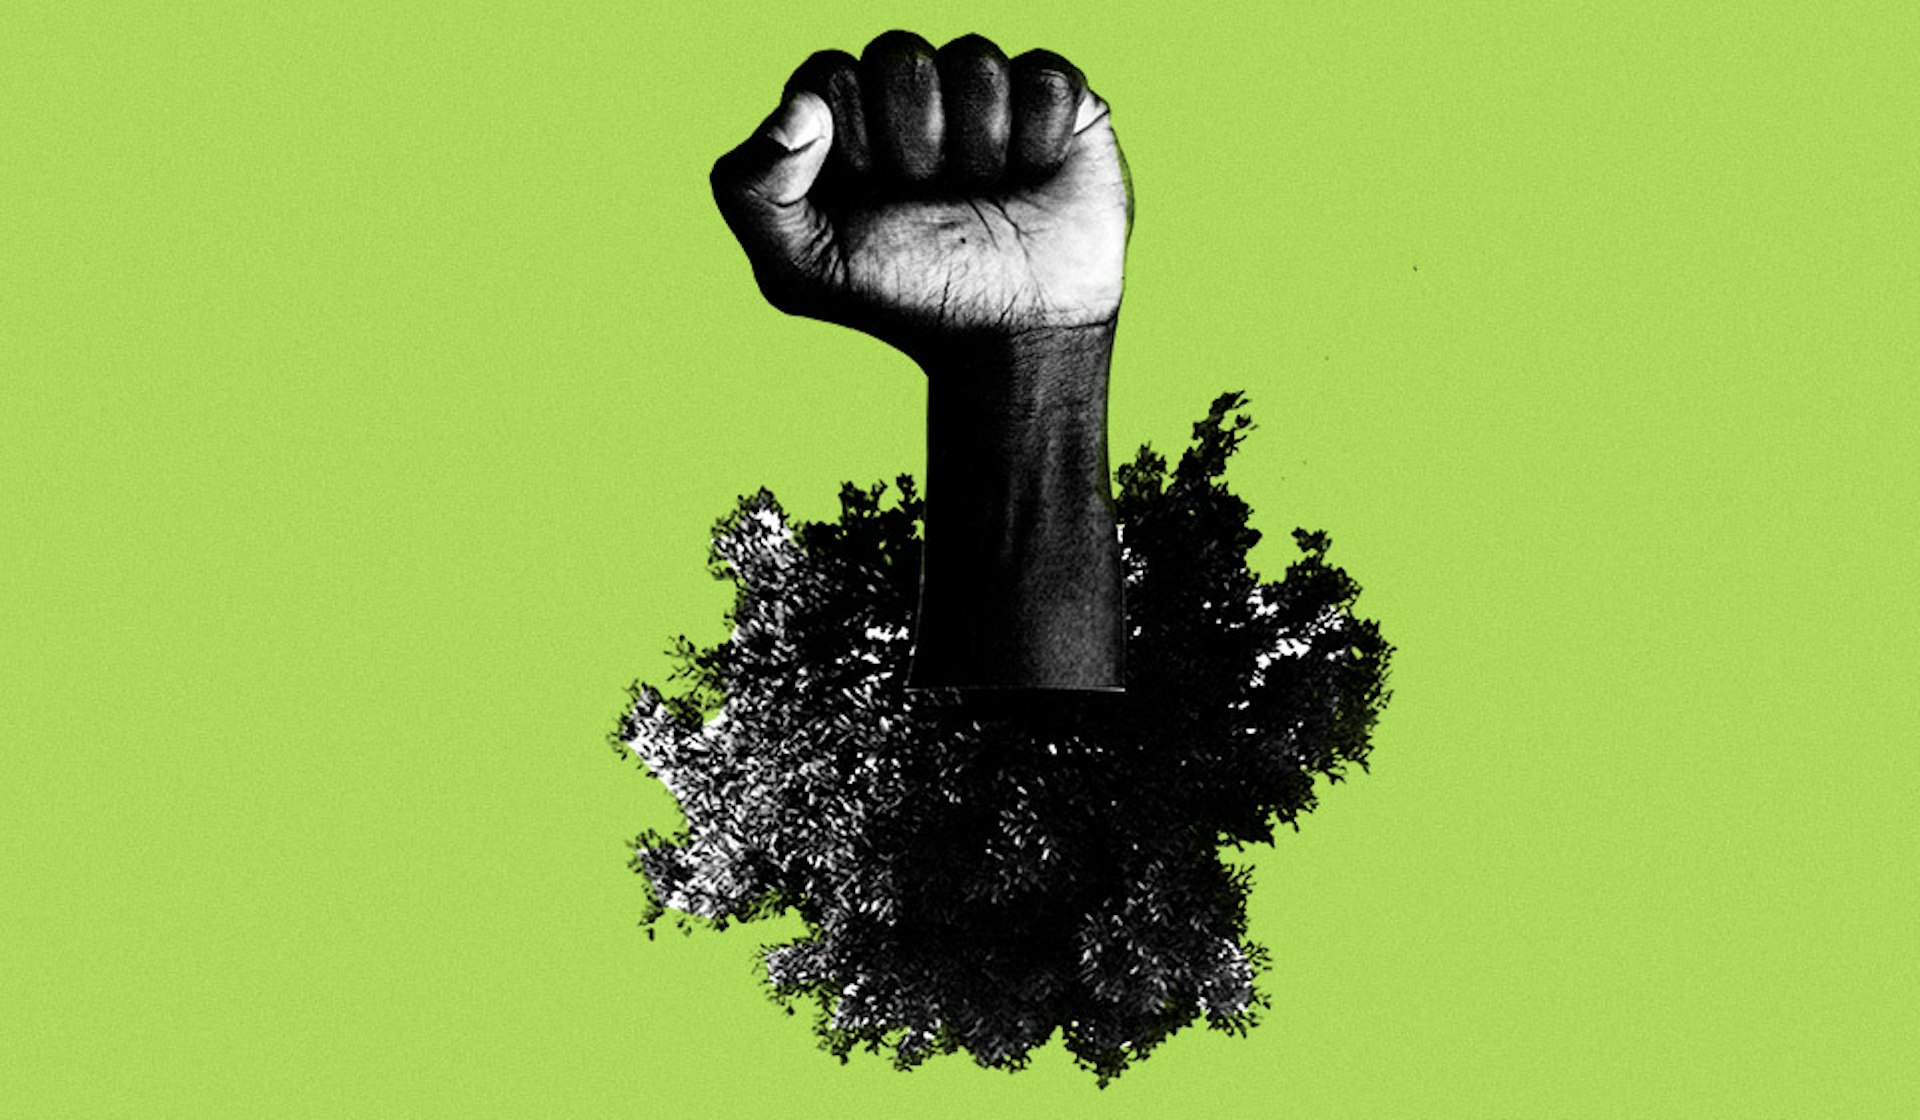 The activists fighting to give nature human rights